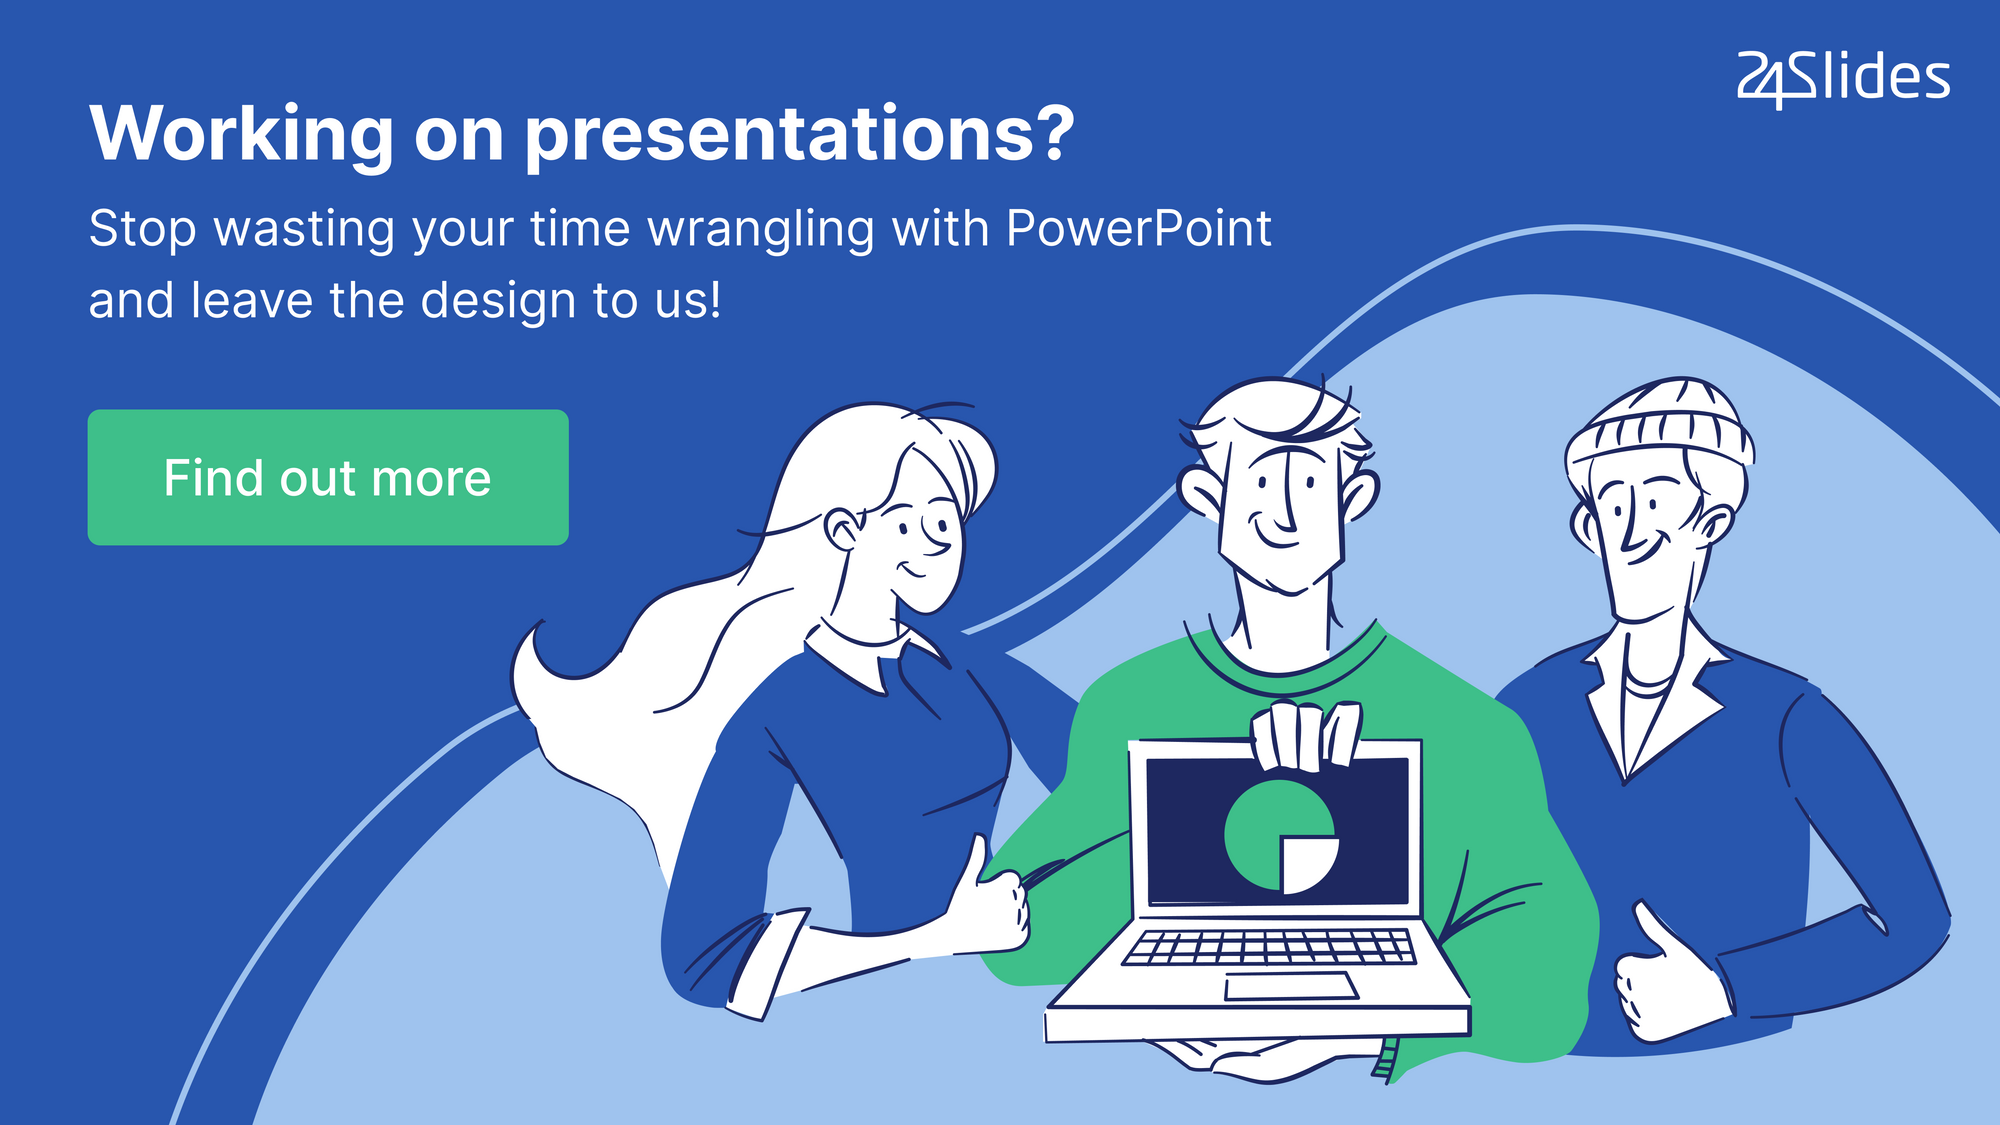 Coporate PowerPoint Slides by 24Slides